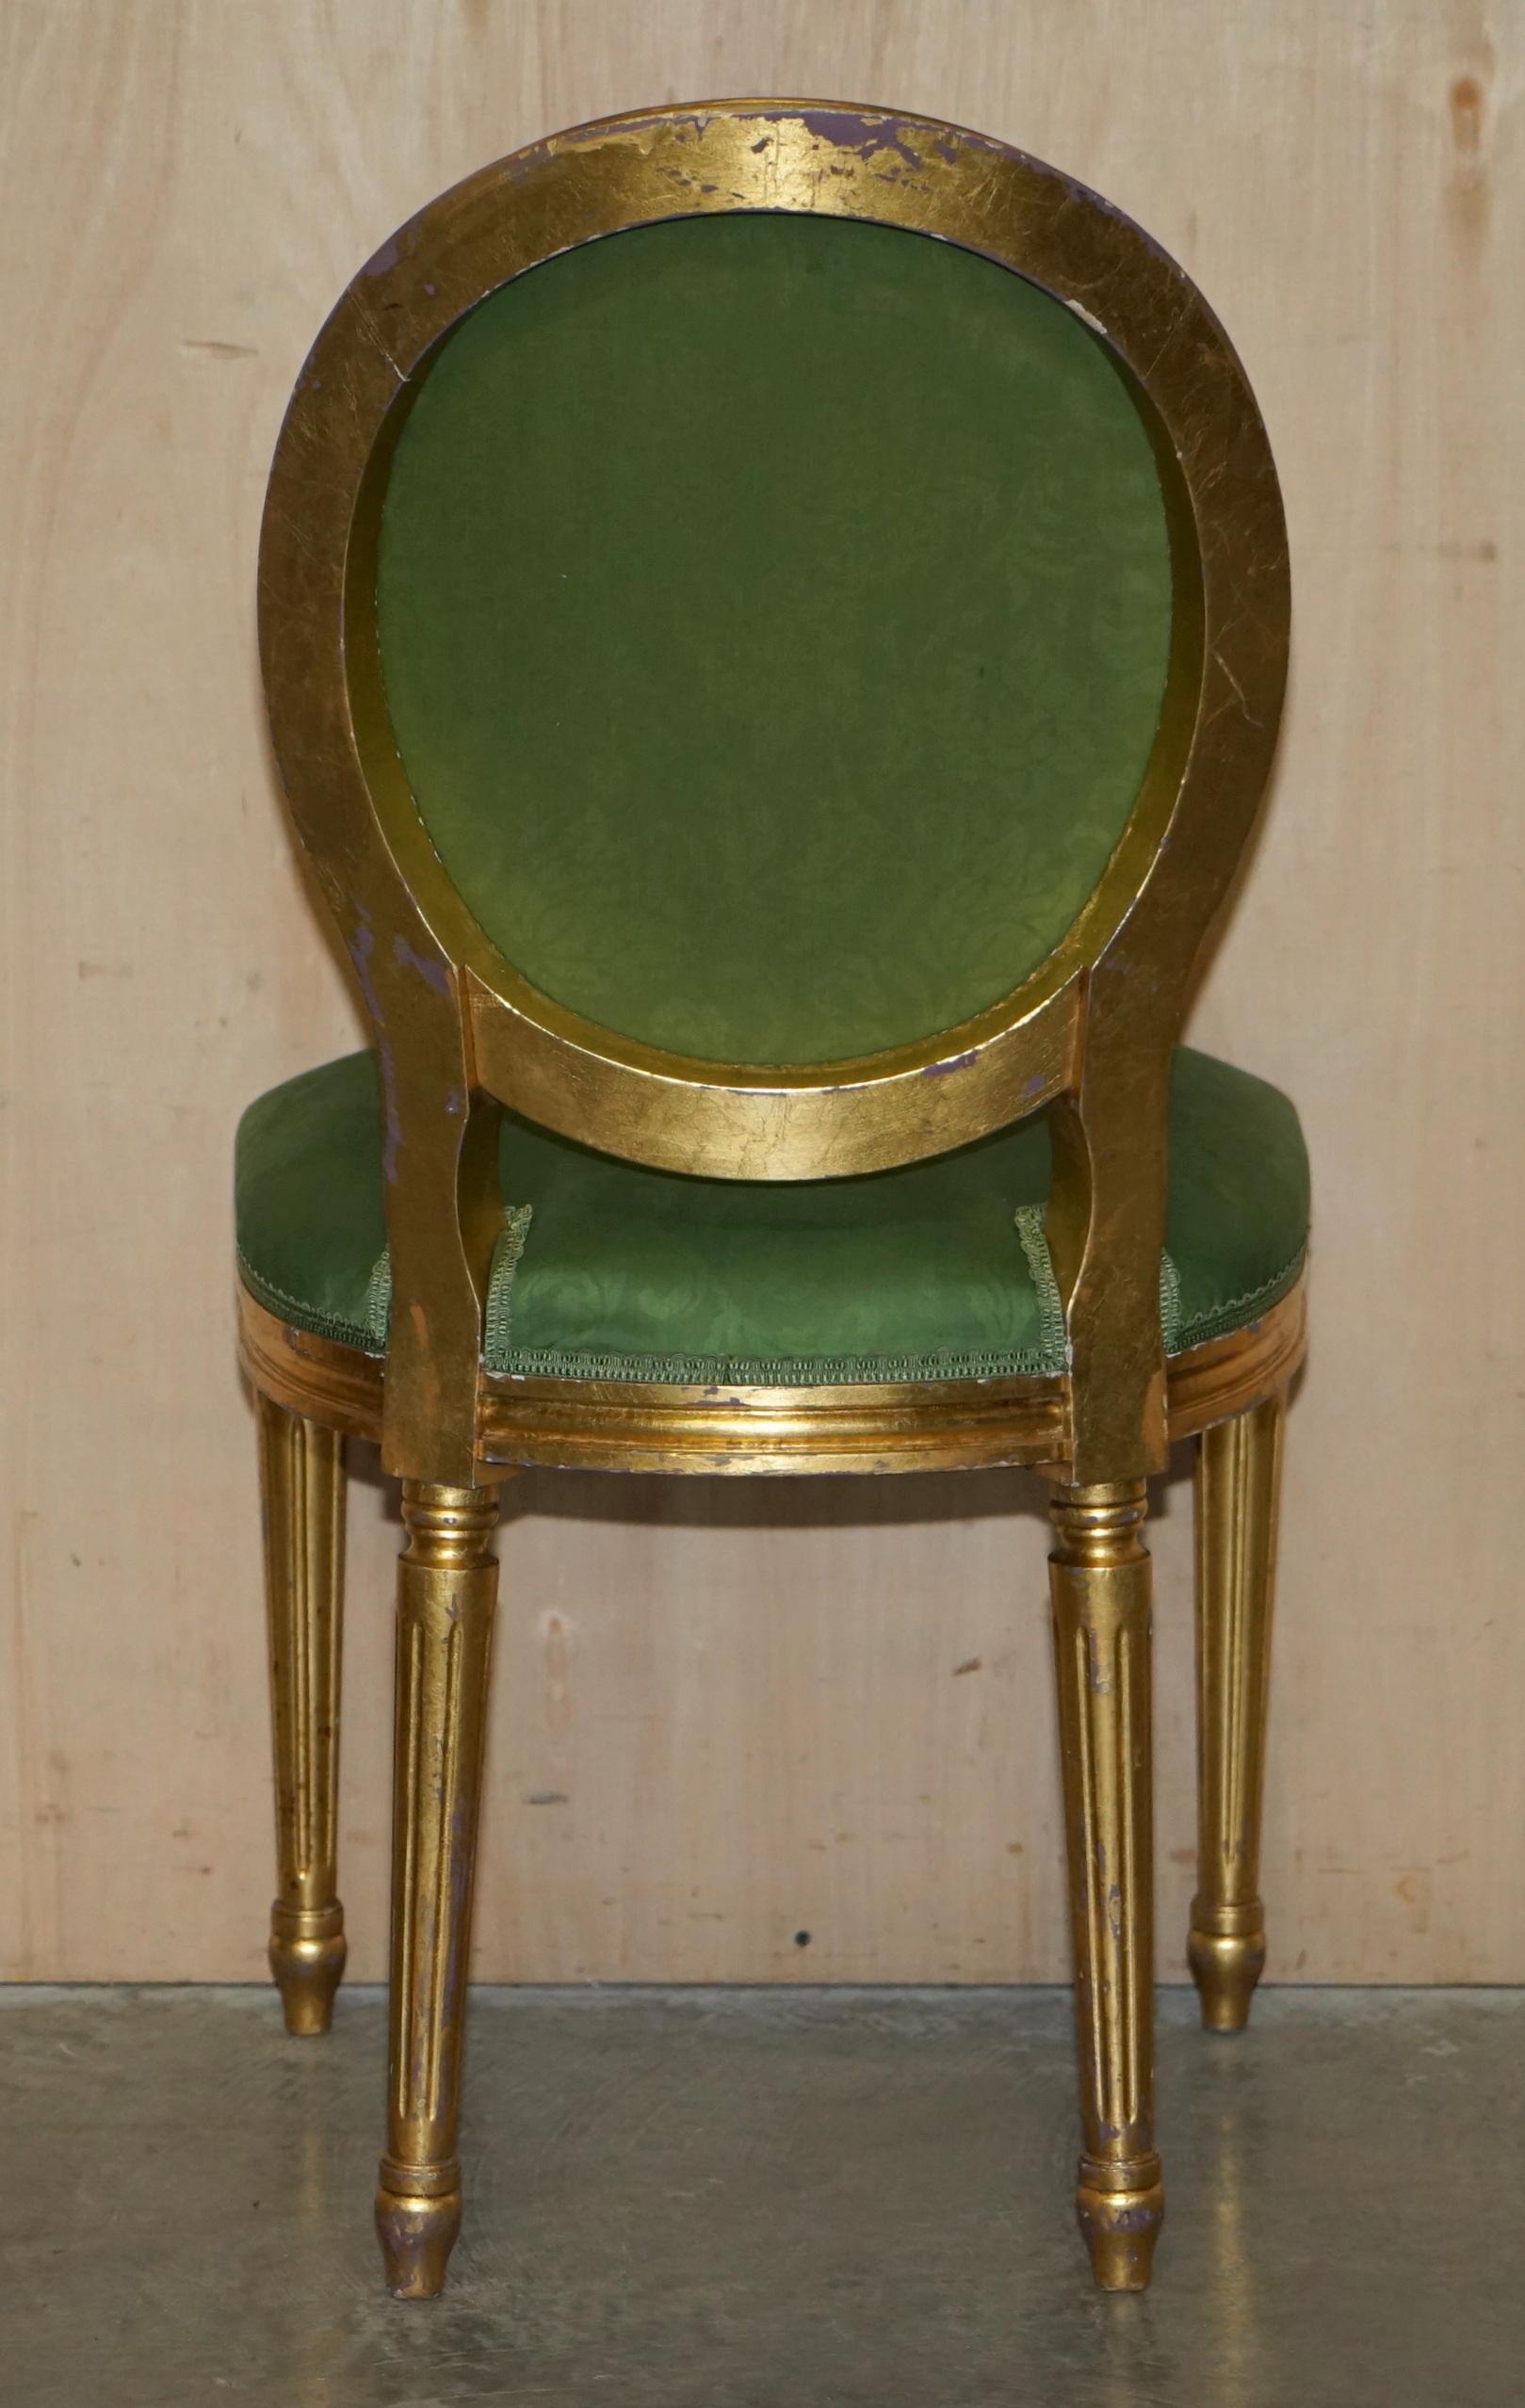 EiGHT ANTIQUE LOUIS XVI  Style DINING CHAIRS FROM LADY DIANA'S SPENCER HOUSE 8 im Angebot 13